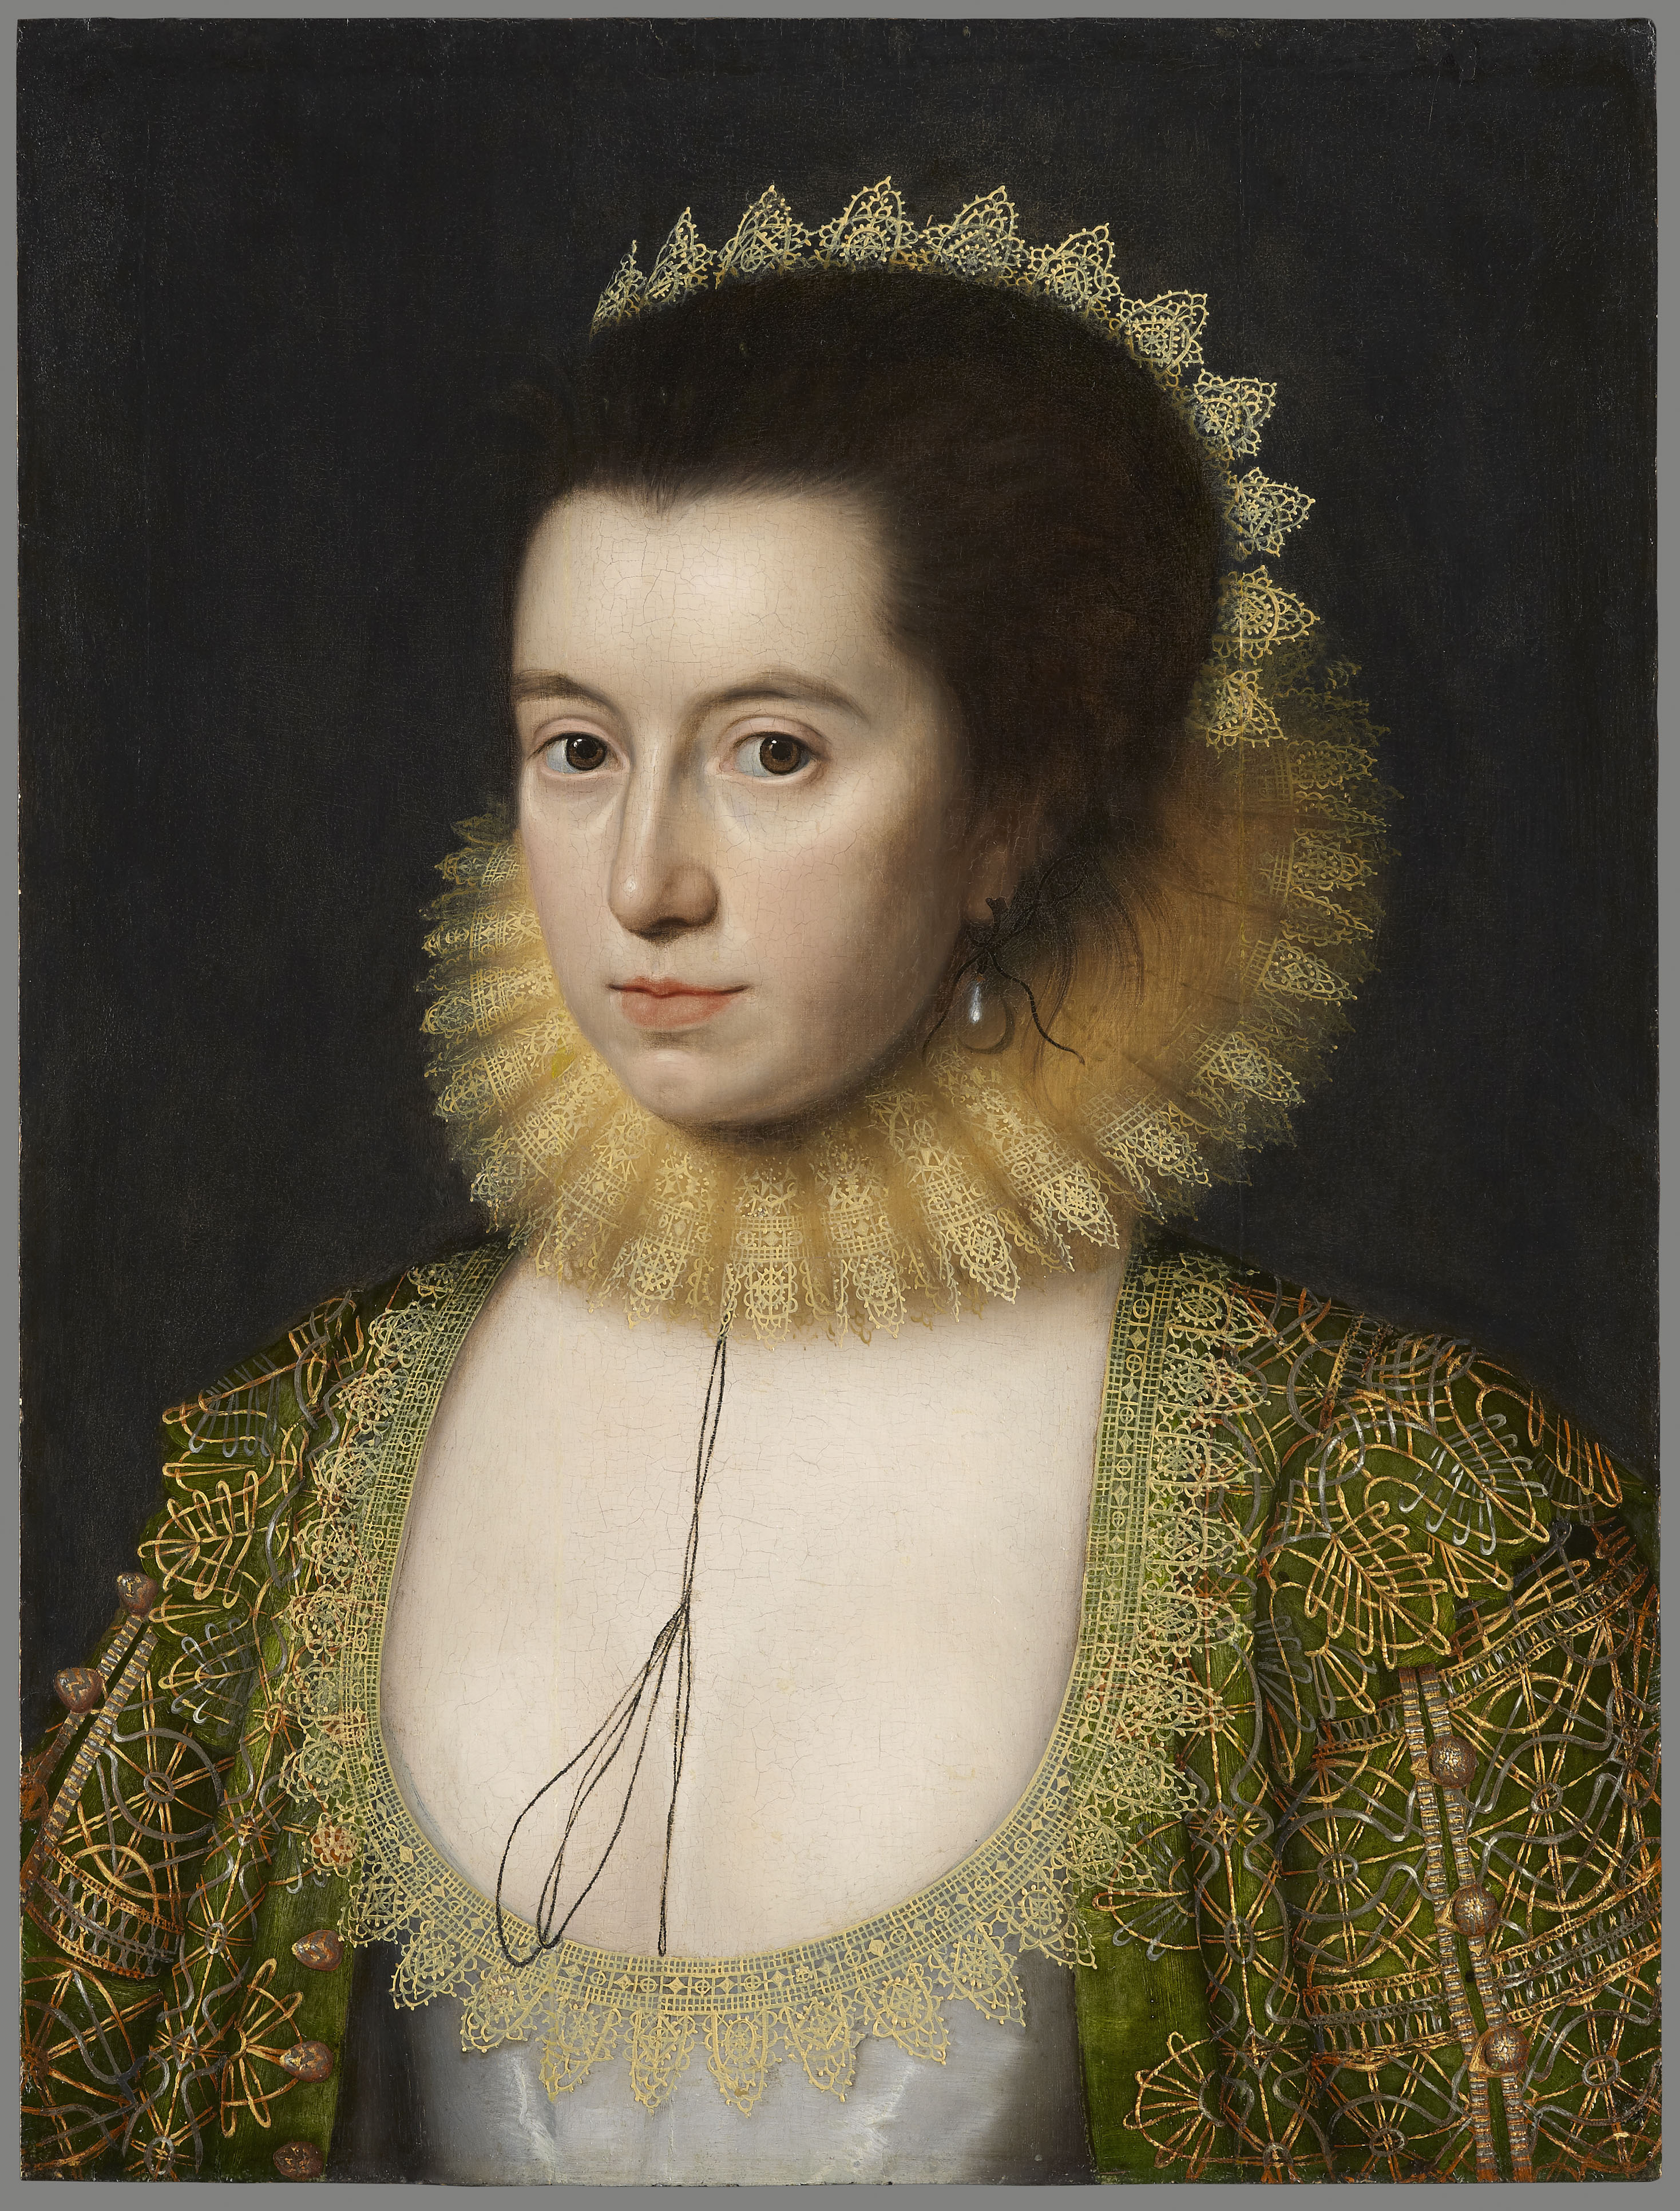 The History Blog » Blog Archive » The NPG acquires lost portrait of ...